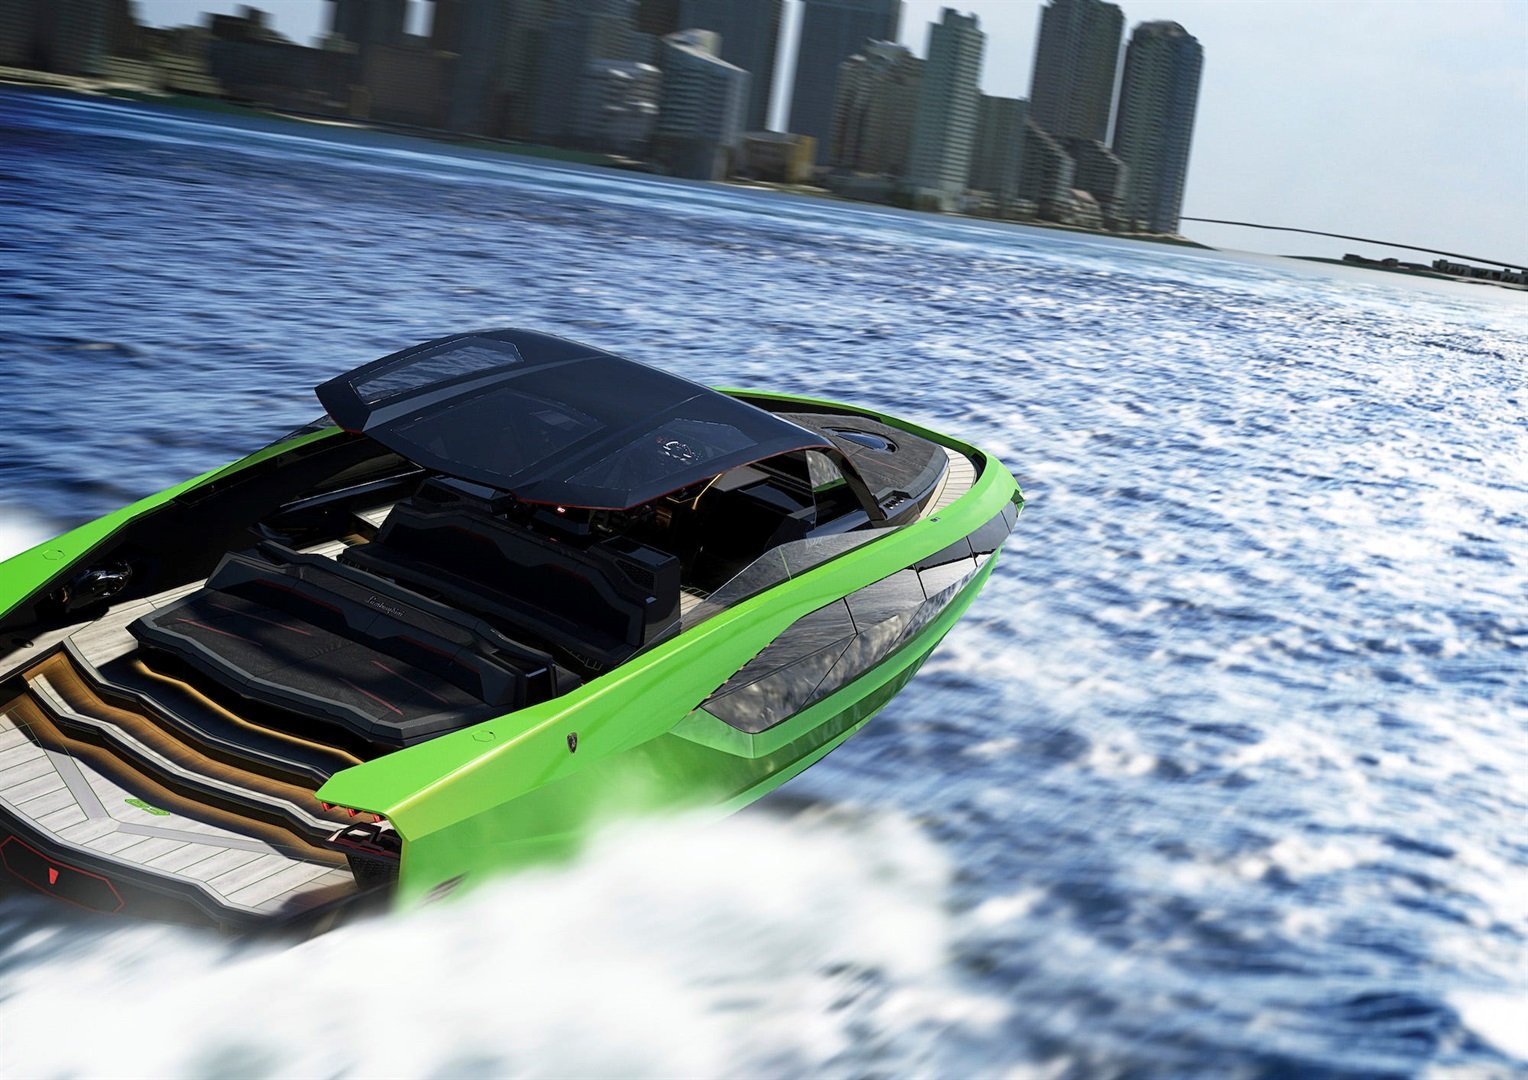 Lamborghini partnered with a boat maker to create this R60 ...